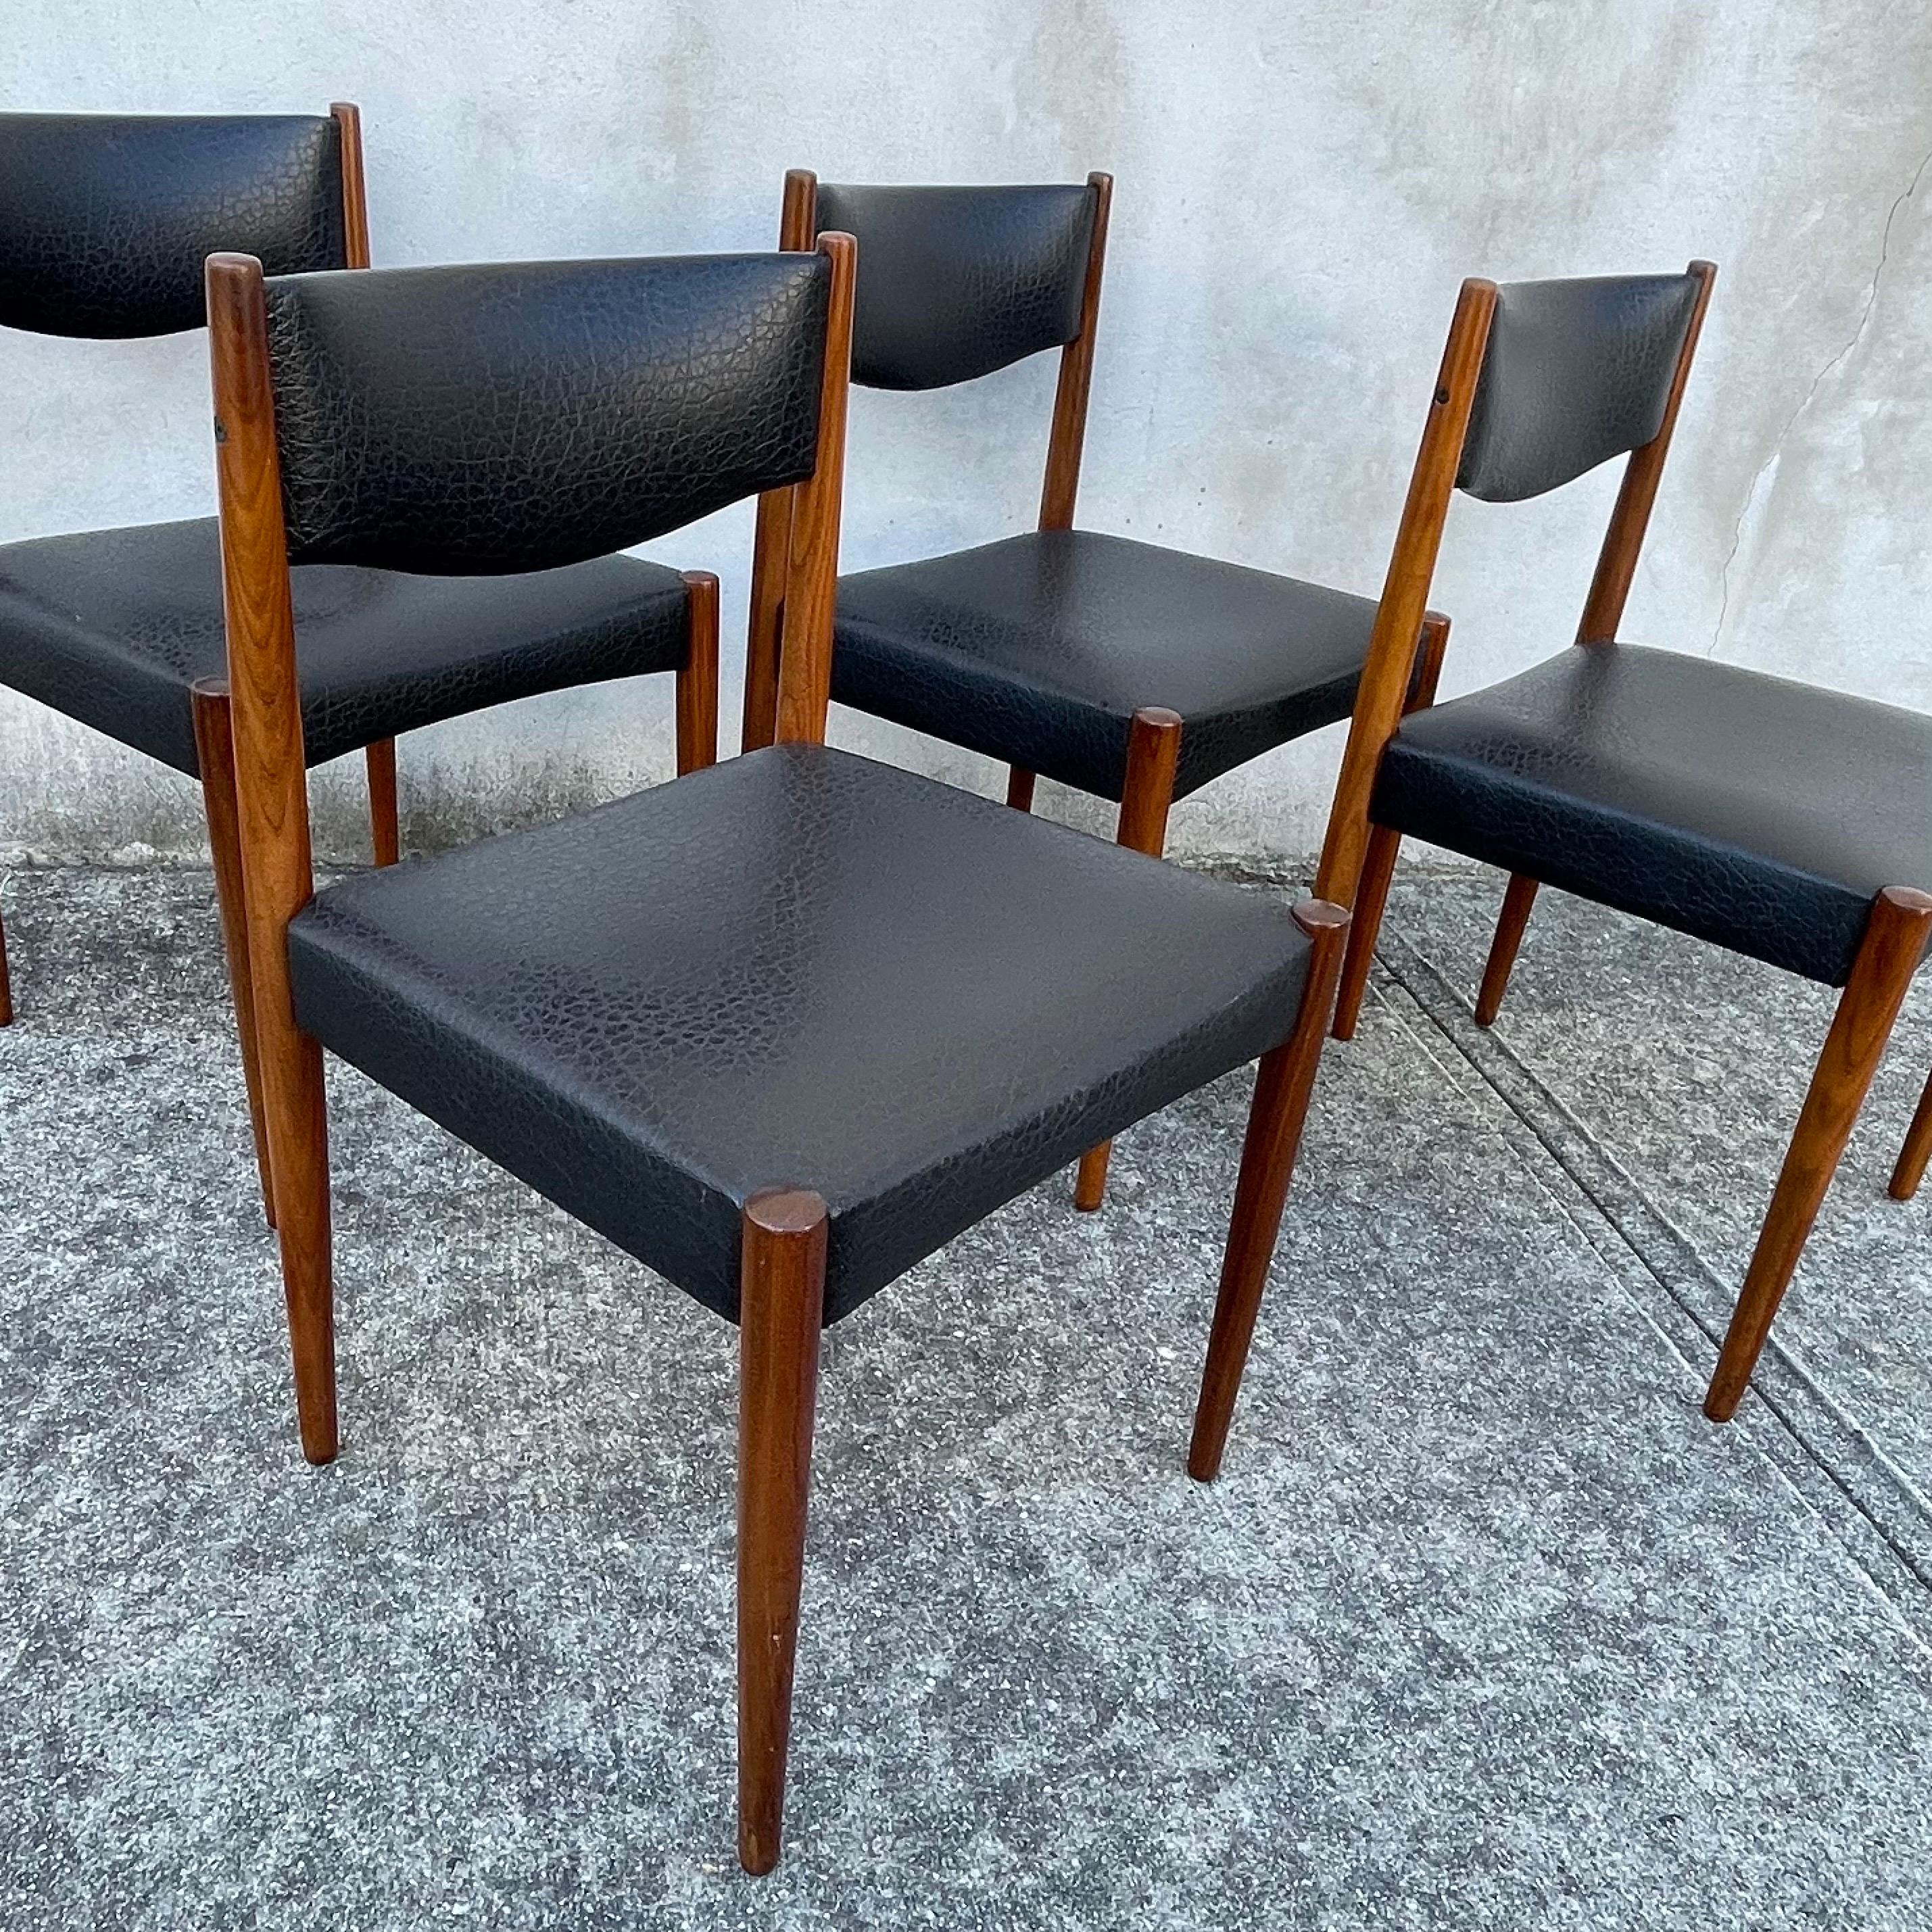 Set of Four Mid-Century Modern Teak Dining Chairs, Faux Black Leather Seats In Good Condition For Sale In Bedford Hills, NY